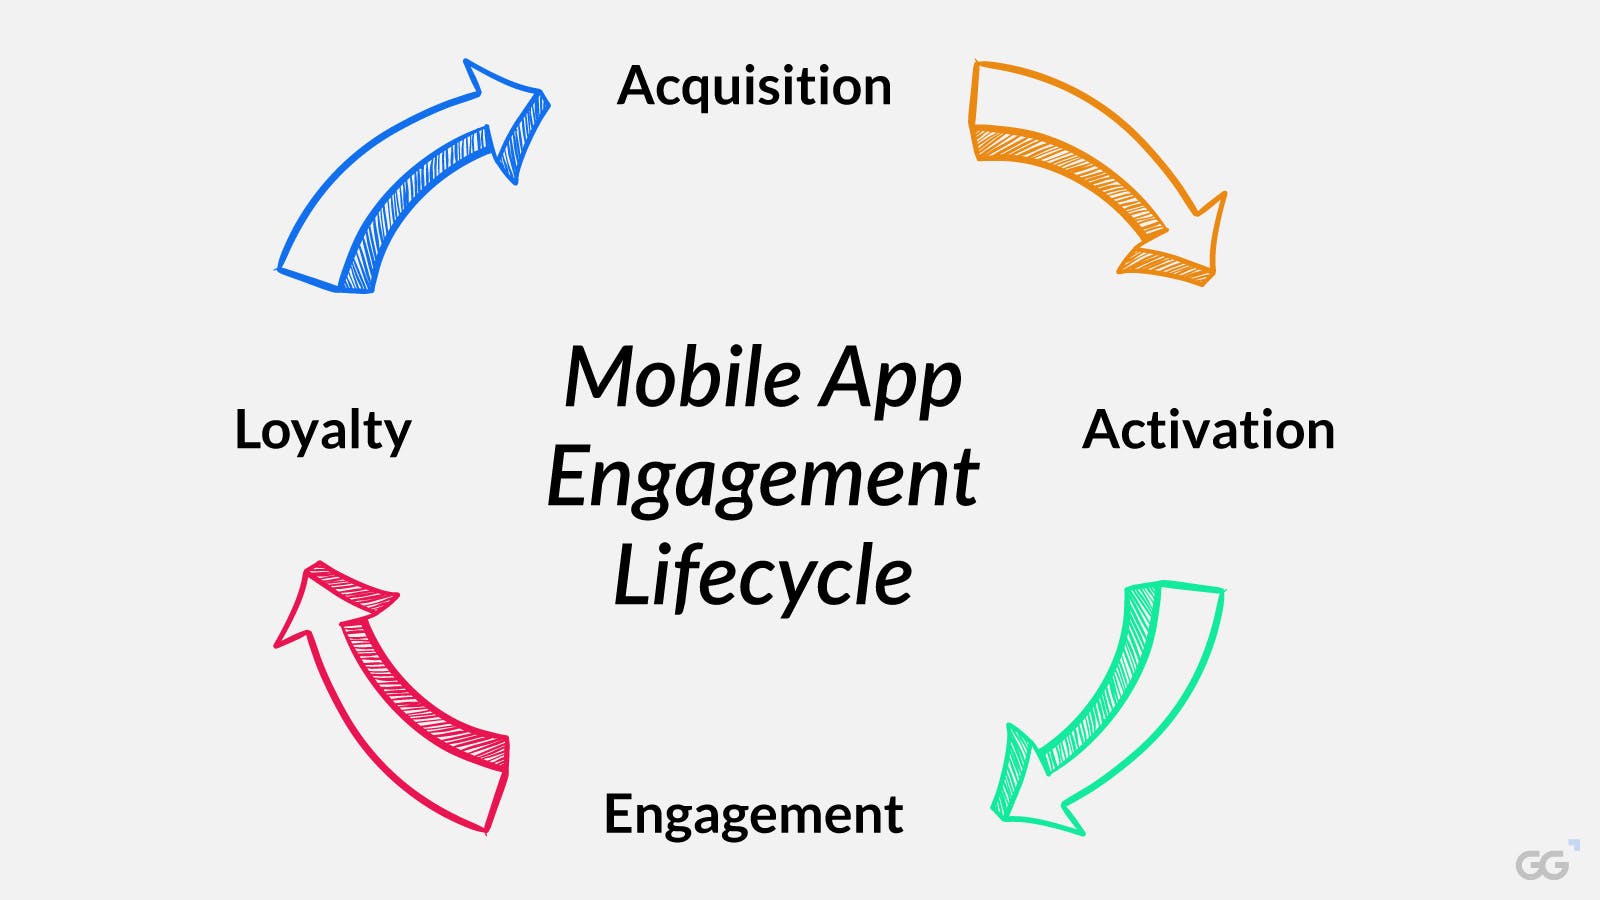 A diagram illustrating the stages in the cycle of engagement for a mobile app user, including acquisition, activation, engagement, and loyalty